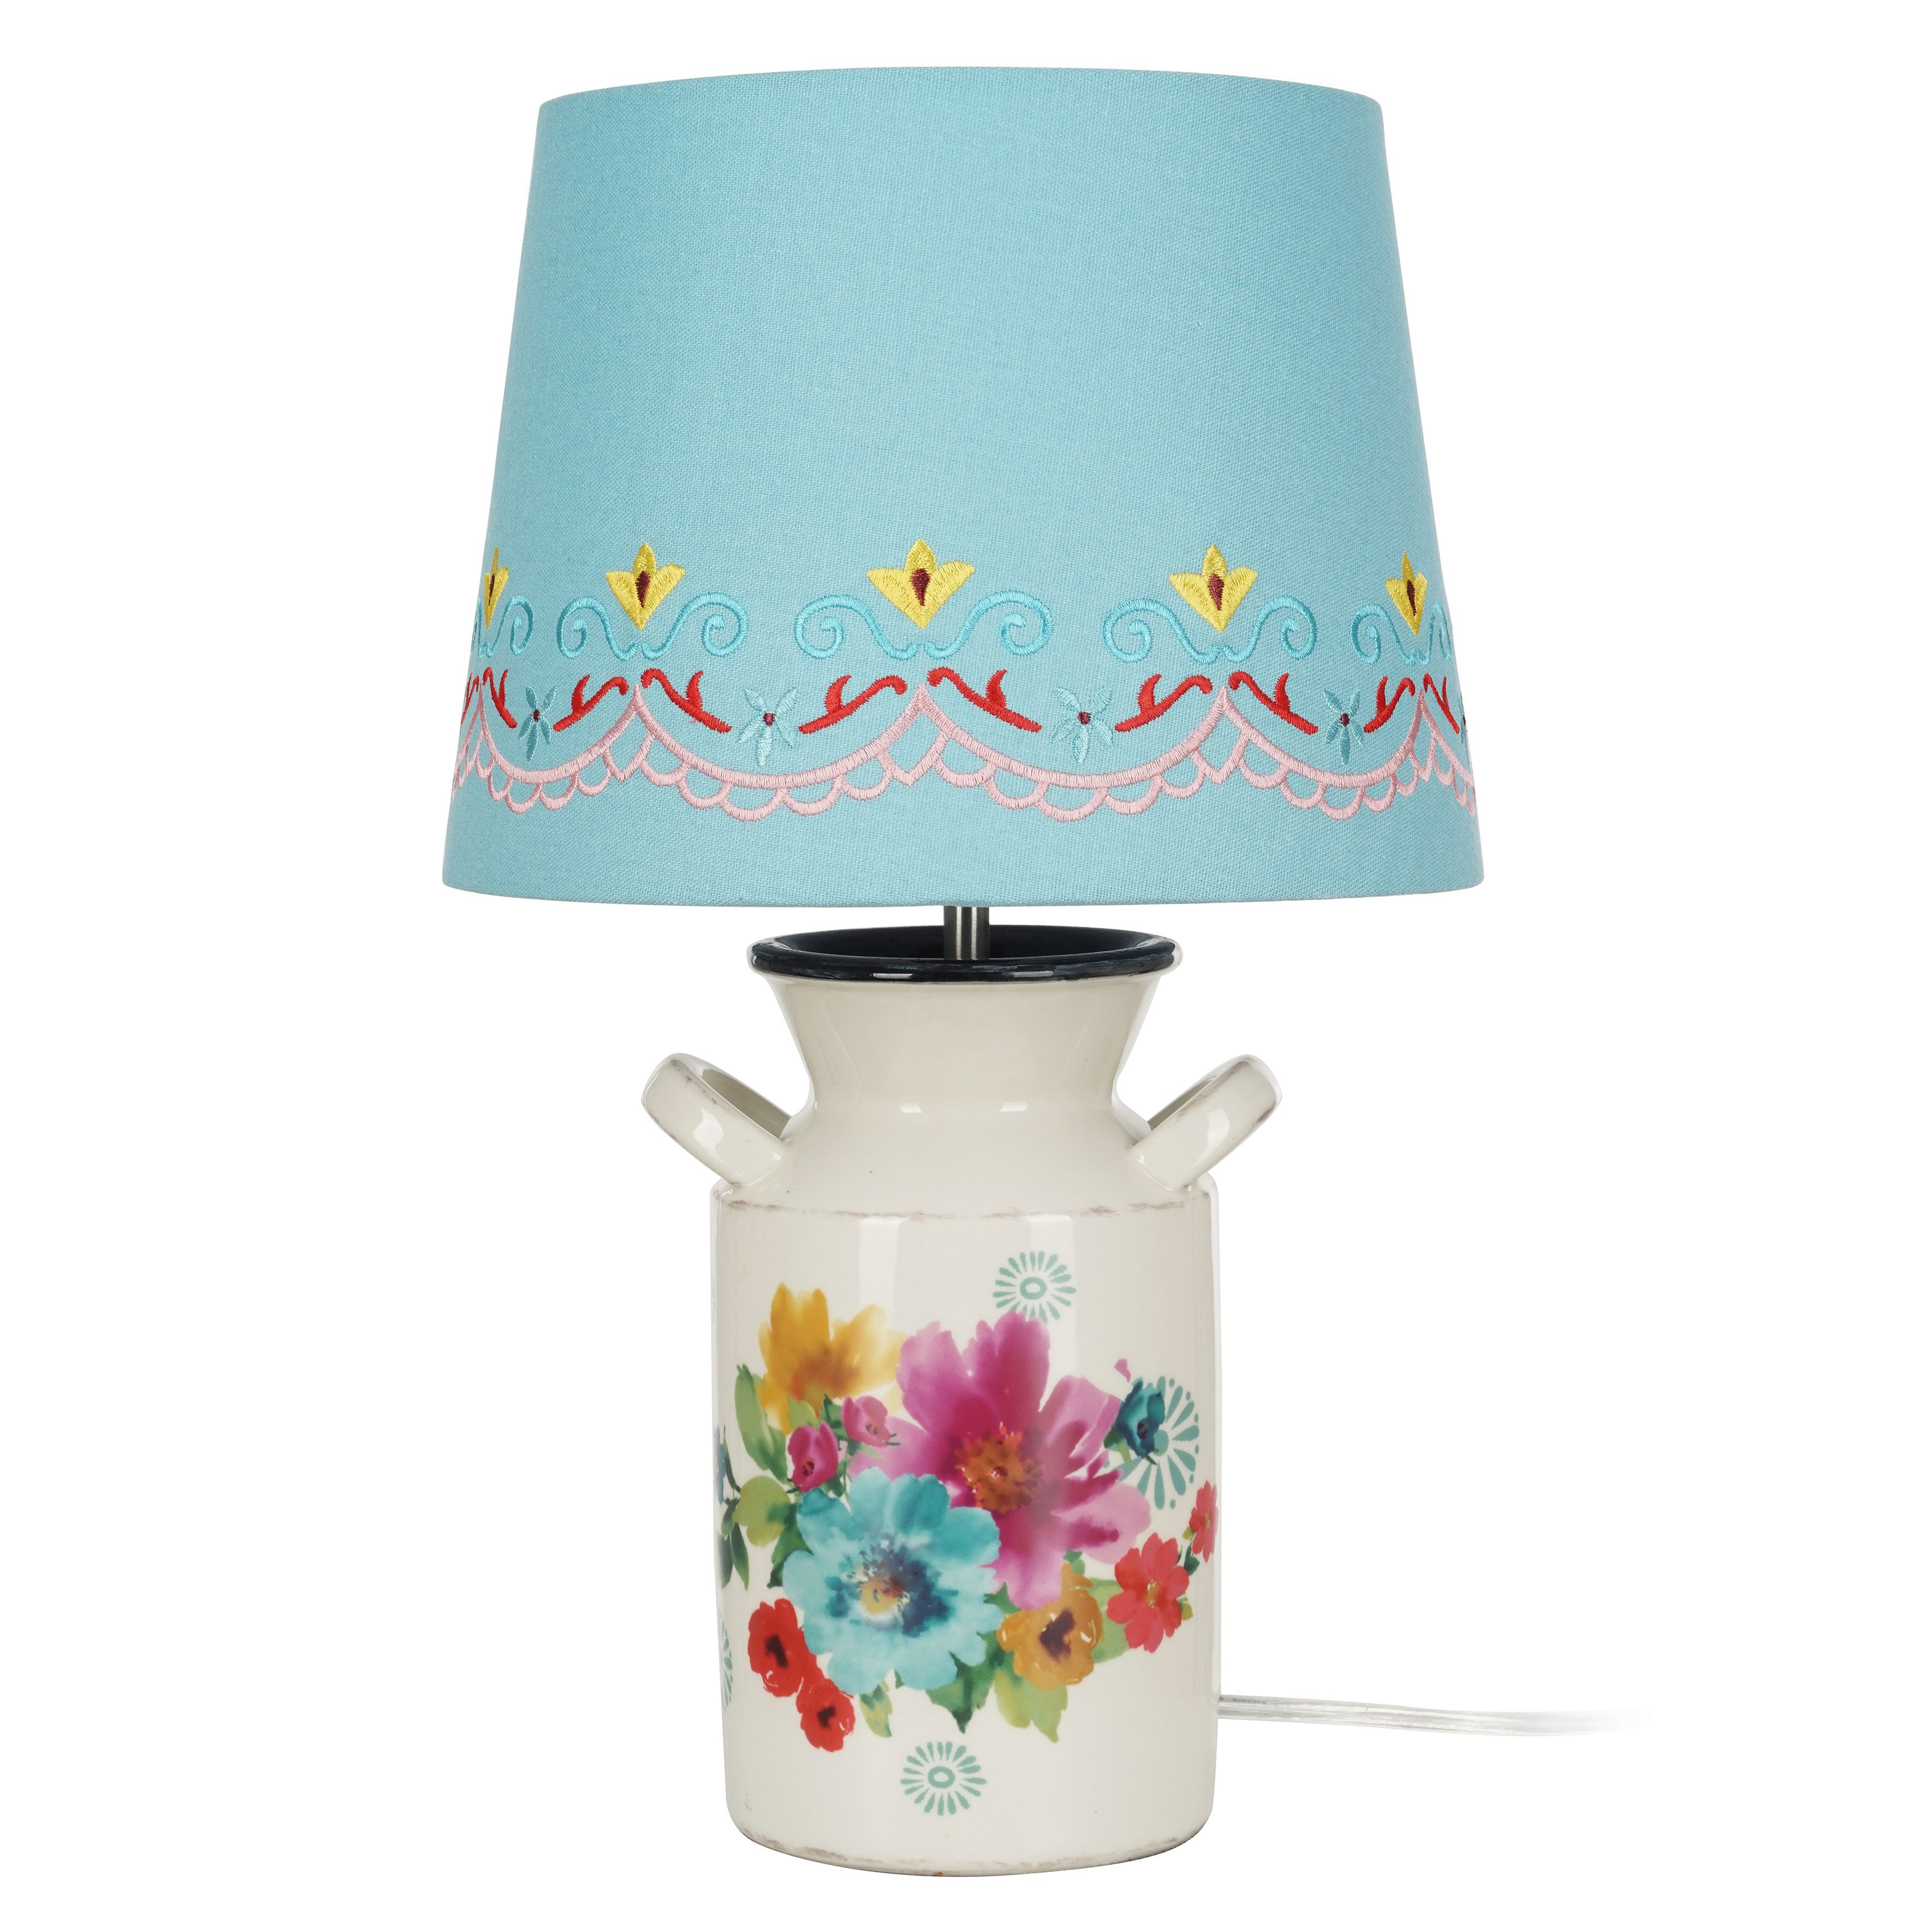 The Pioneer Woman Breezy Blossoms Table Lamp